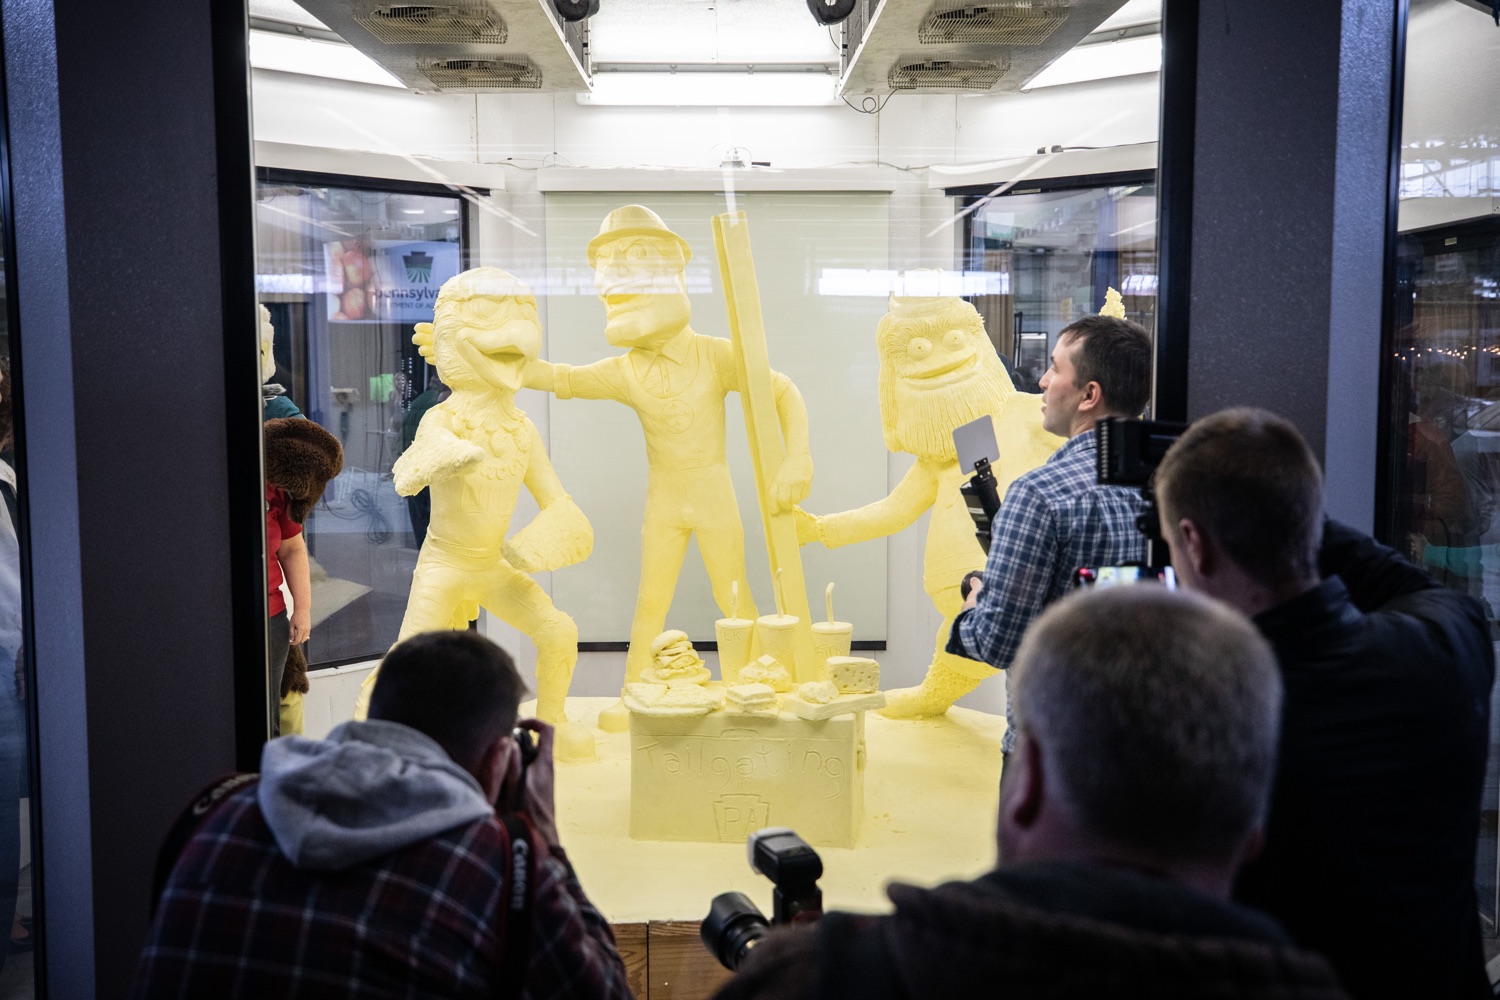 Press crowdind around the butter sculpture for the big reveal. Lt. Governor John Fetterman and Secretary of Agriculture Russell Redding today unveiled the 2020 Pennsylvania Farm Show butter sculpture, carved from a half-ton of butter depicting three of Pennsylvanias beloved professional sports mascots: Philadelphia Flyers Gritty, Philadelphia Eagles Swoop, and Pittsburgh Steelers Steely McBeam celebrating with a spread of Pennsylvania dairy products. The sculpture, a long-time Farm Show staple, encourages Pennsylvanians to be a fan of Pennsylvania dairy and give a cheer to the more than 6,200 dairy farmers in the commonwealth.  Harrisburg, PA  January 2, 2020<br><a href="https://filesource.amperwave.net/commonwealthofpa/photo/17646_agric_butter_sculpture_dz_006.jpg" target="_blank">⇣ Download Photo</a>